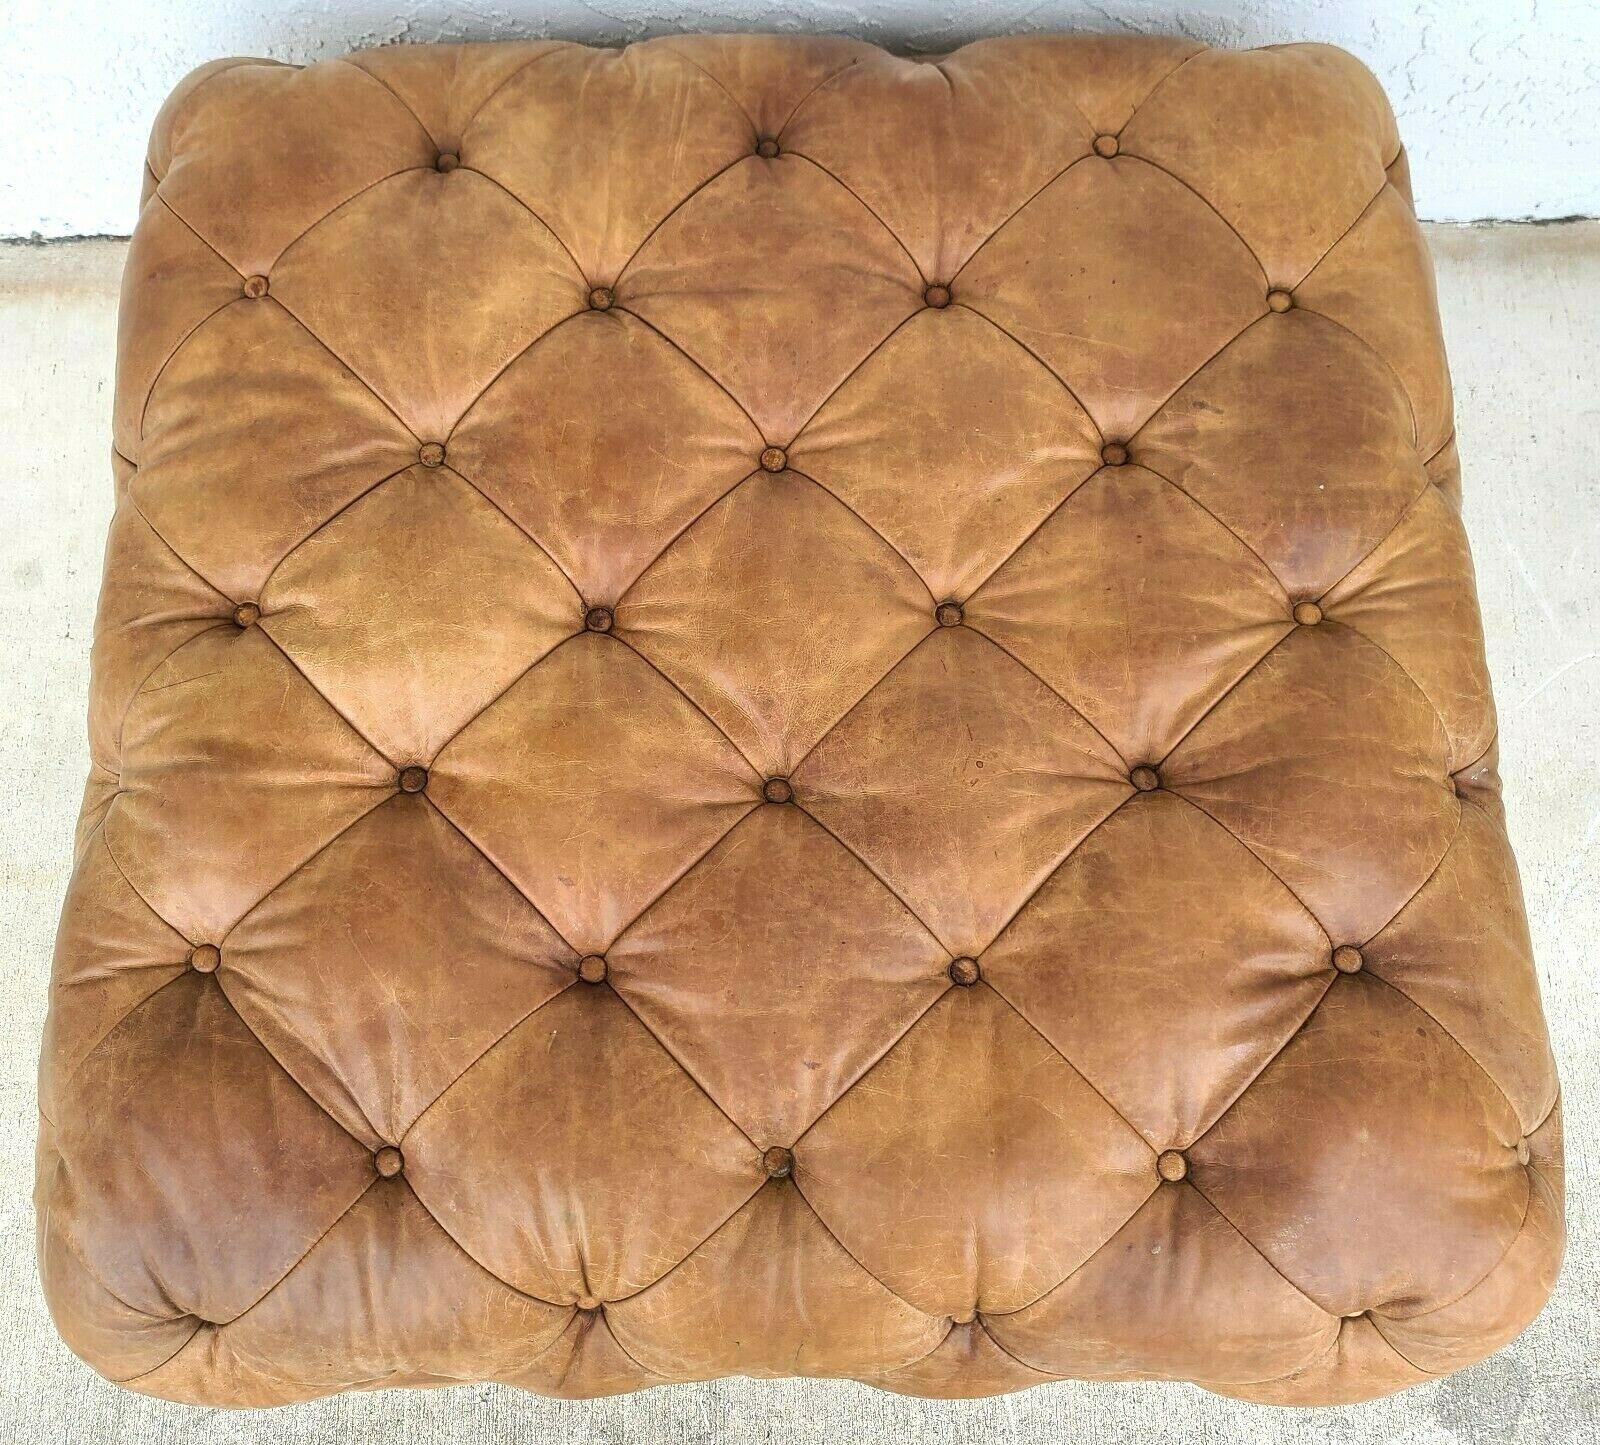 Offering One Of Our Recent Palm Beach Estate Fine Furniture Acquisitions Of A
MCM Ralph Lauren style tufted saddle leather ottoman pouf cocktail table

Approximate Measurements in Inches
18